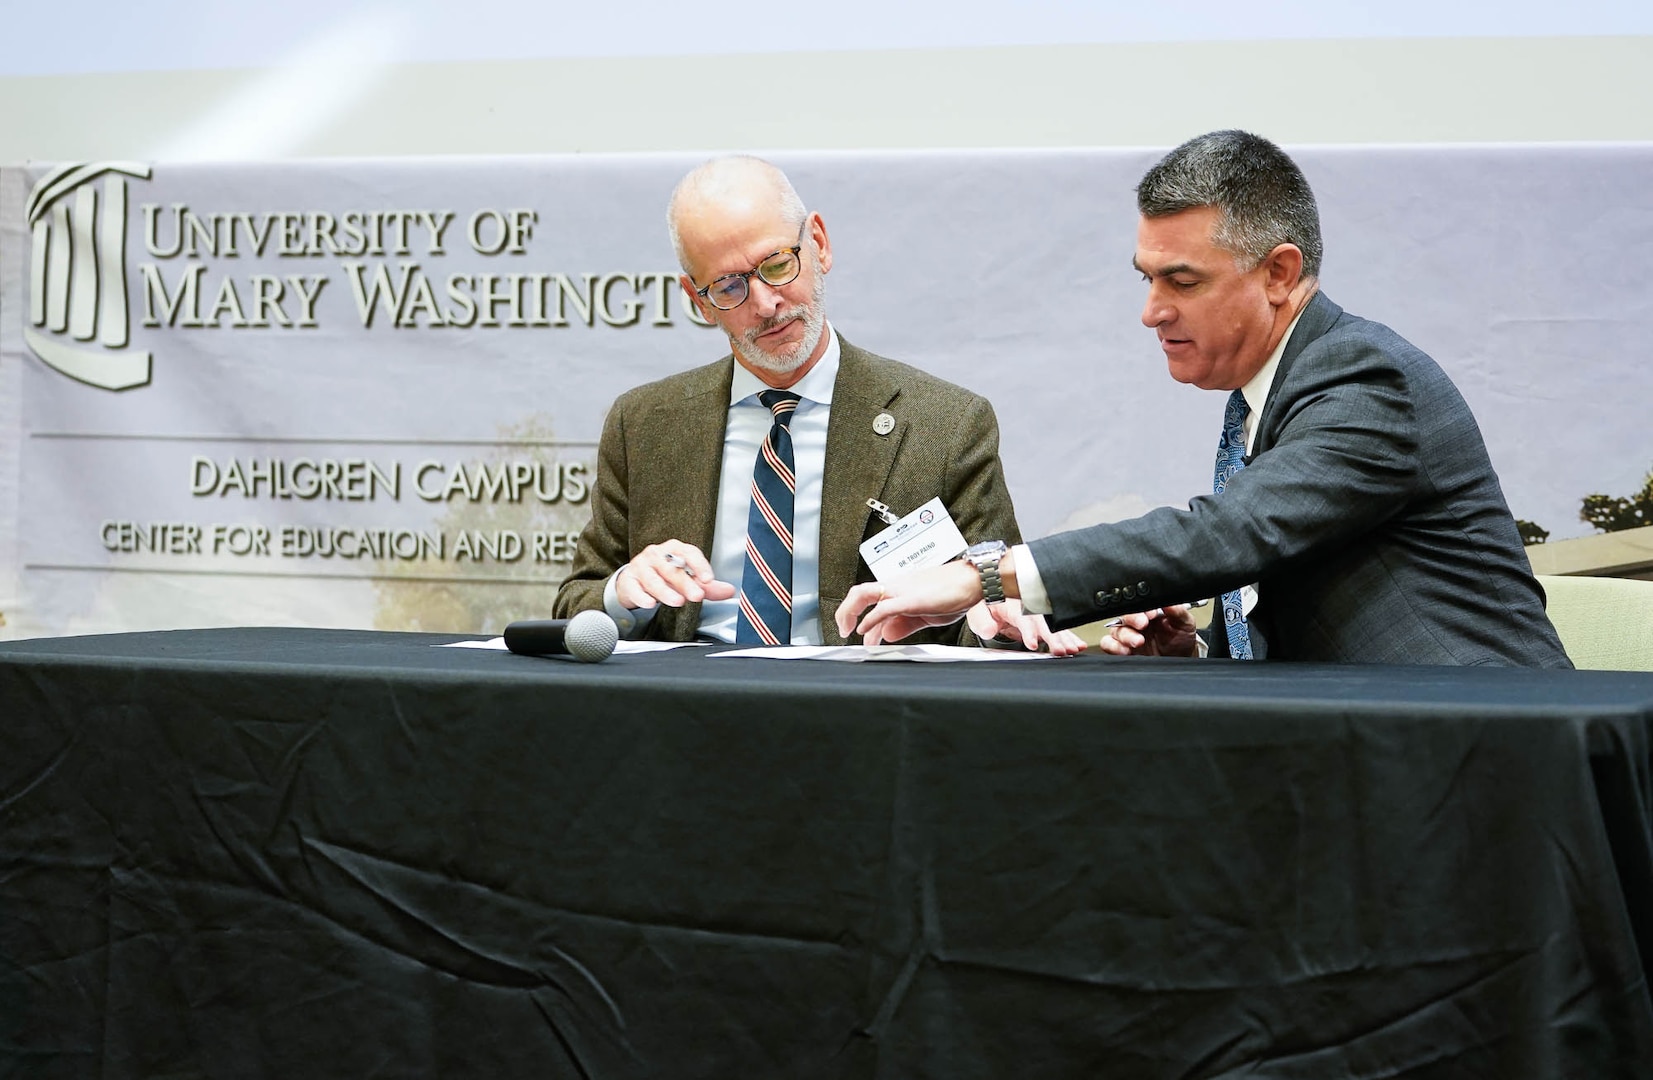 IMAGE: University of Mary Washington (UMW) President Dr. Troy Paino (left) and Naval Surface Warfare Center Dahlgren Division Technical Director Dale Sisson Jr., P.E., SES, signed a Partnership Intermediary Agreement between the university and the installation at the Potomac Tech Bridge kickoff event Dec. 12 at UMW Dahlgren Campus.